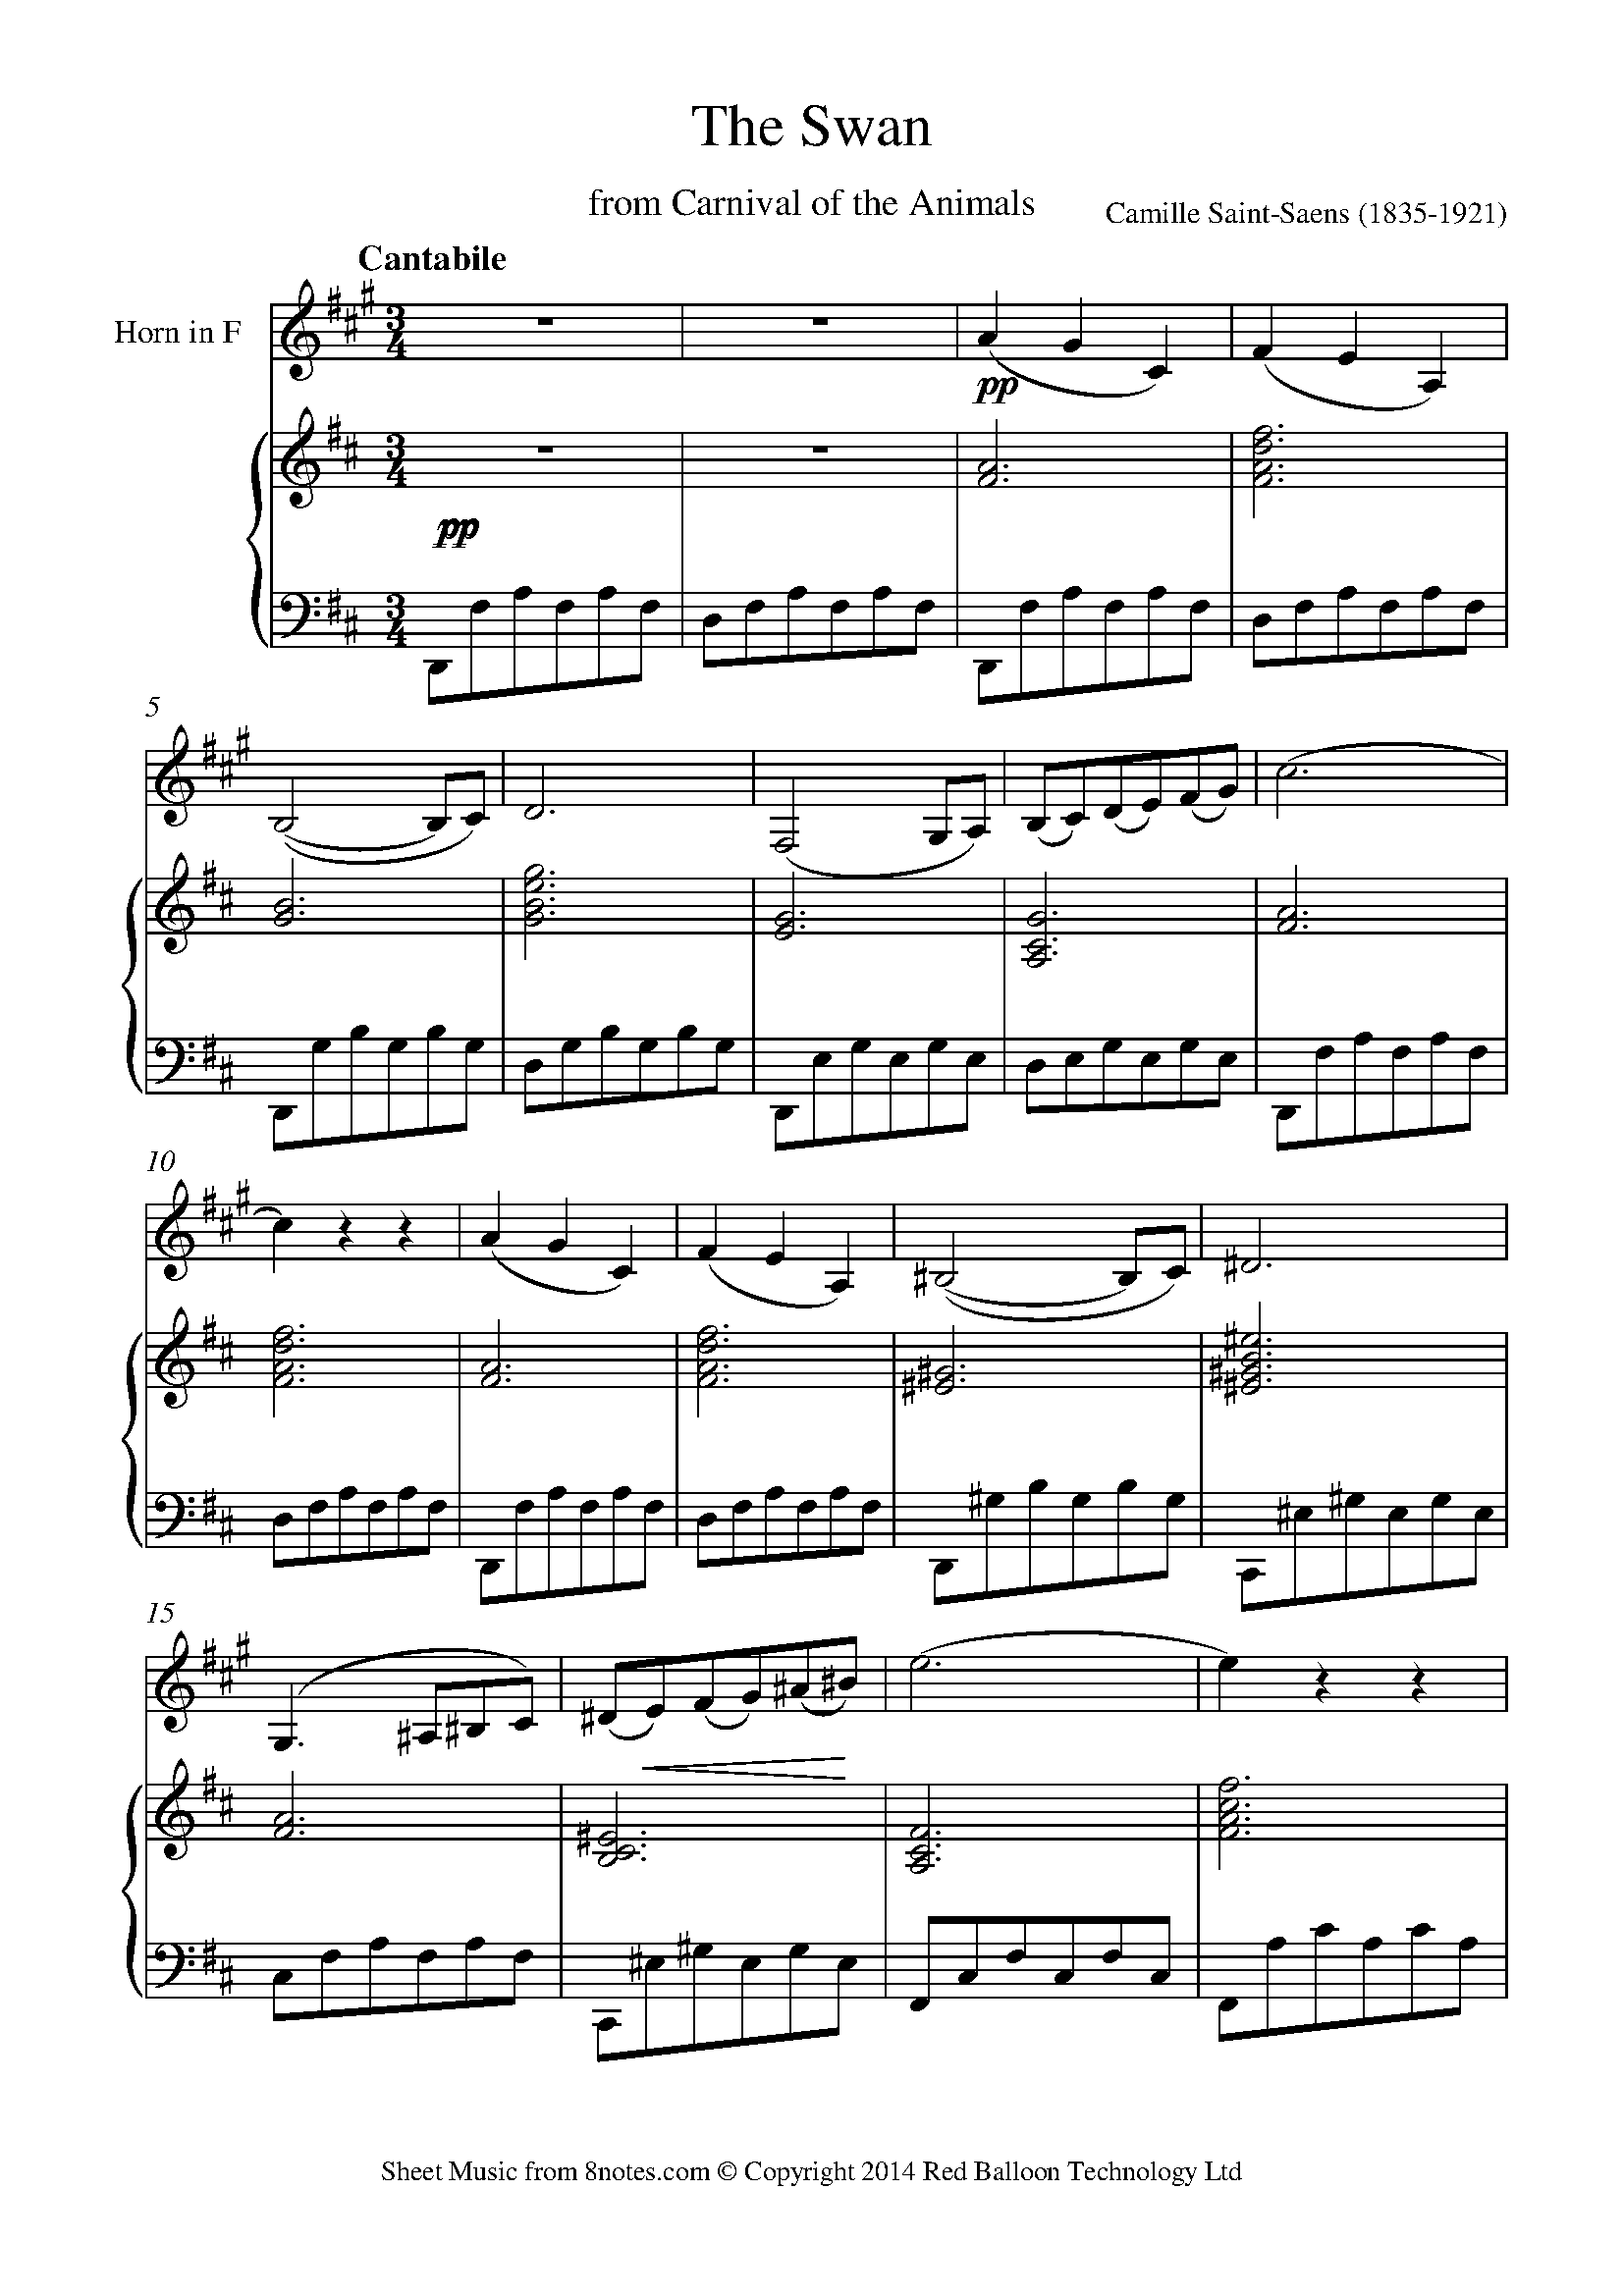 Saint-Saëns - The Swan from Carnival of the Animals Sheet music for French  Horn 